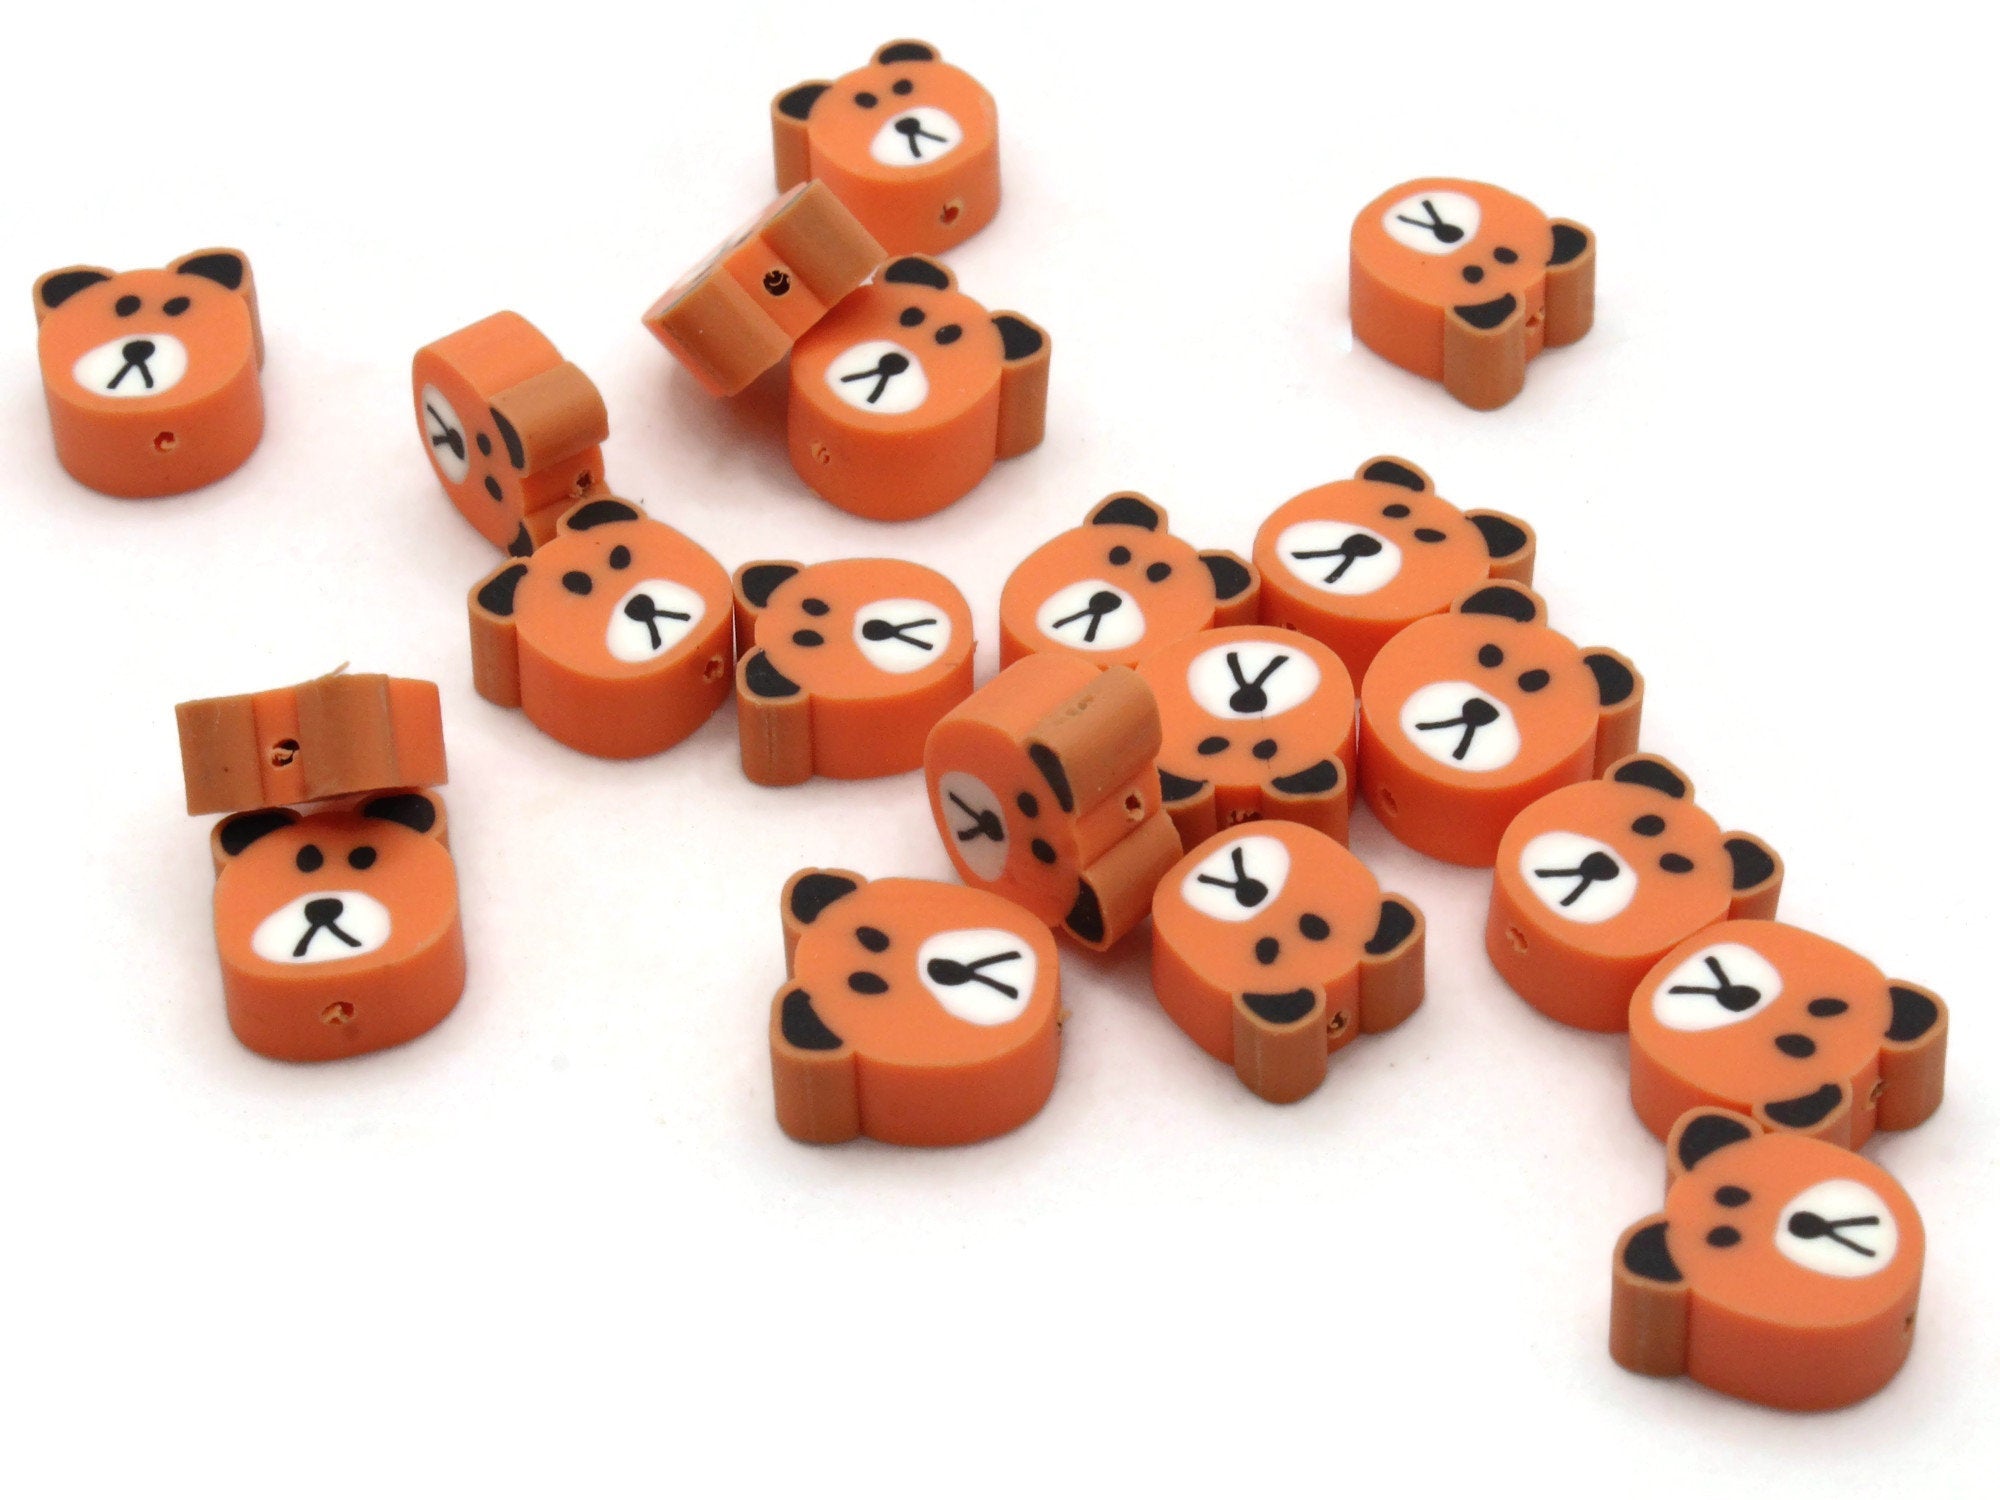 20 polymer clay beads, mixed orange, red